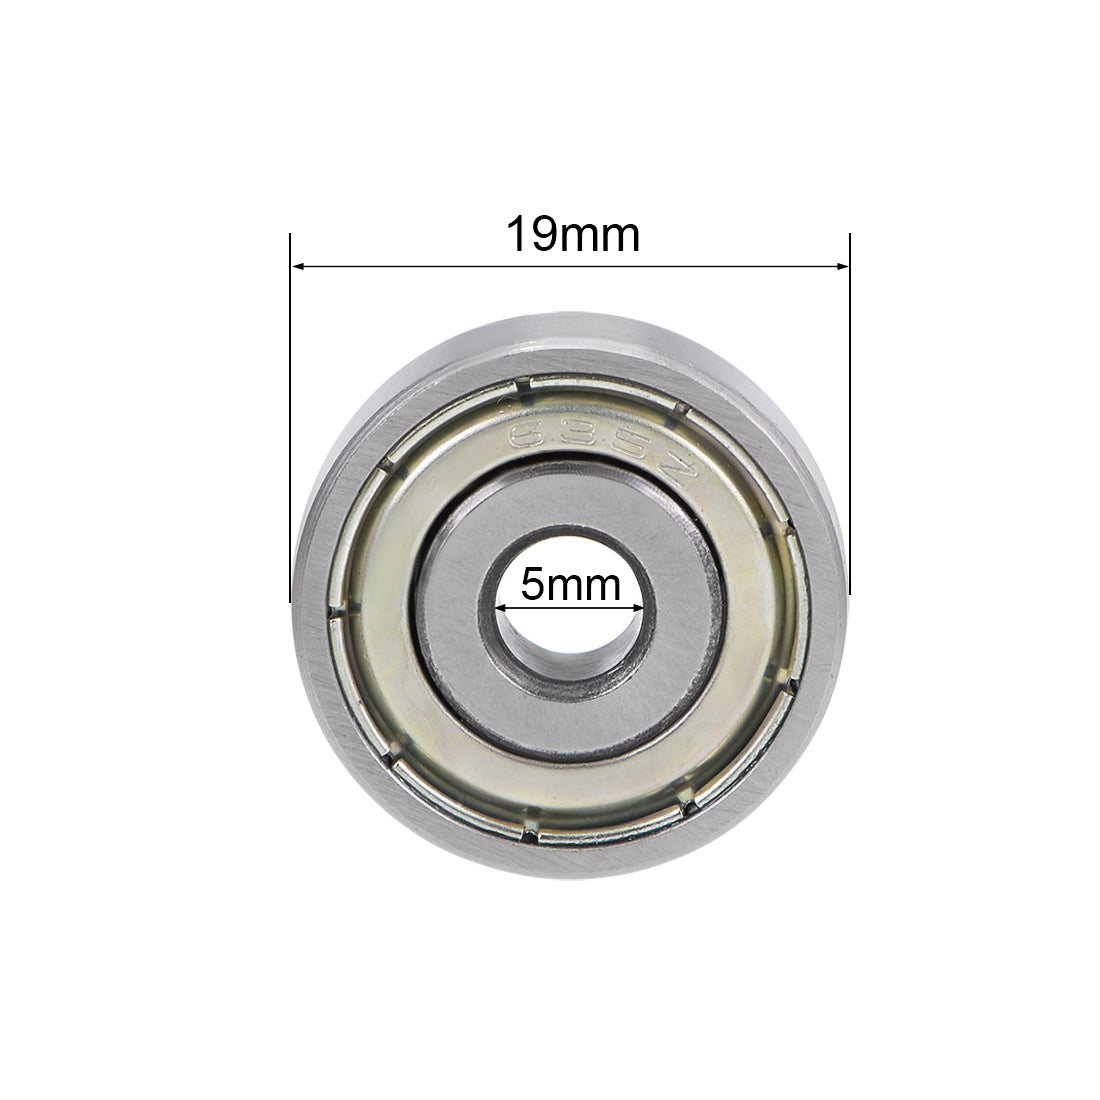 uxcell Uxcell Deep Groove Ball Bearing Metric Double Shielded High Carbon Steel Z2